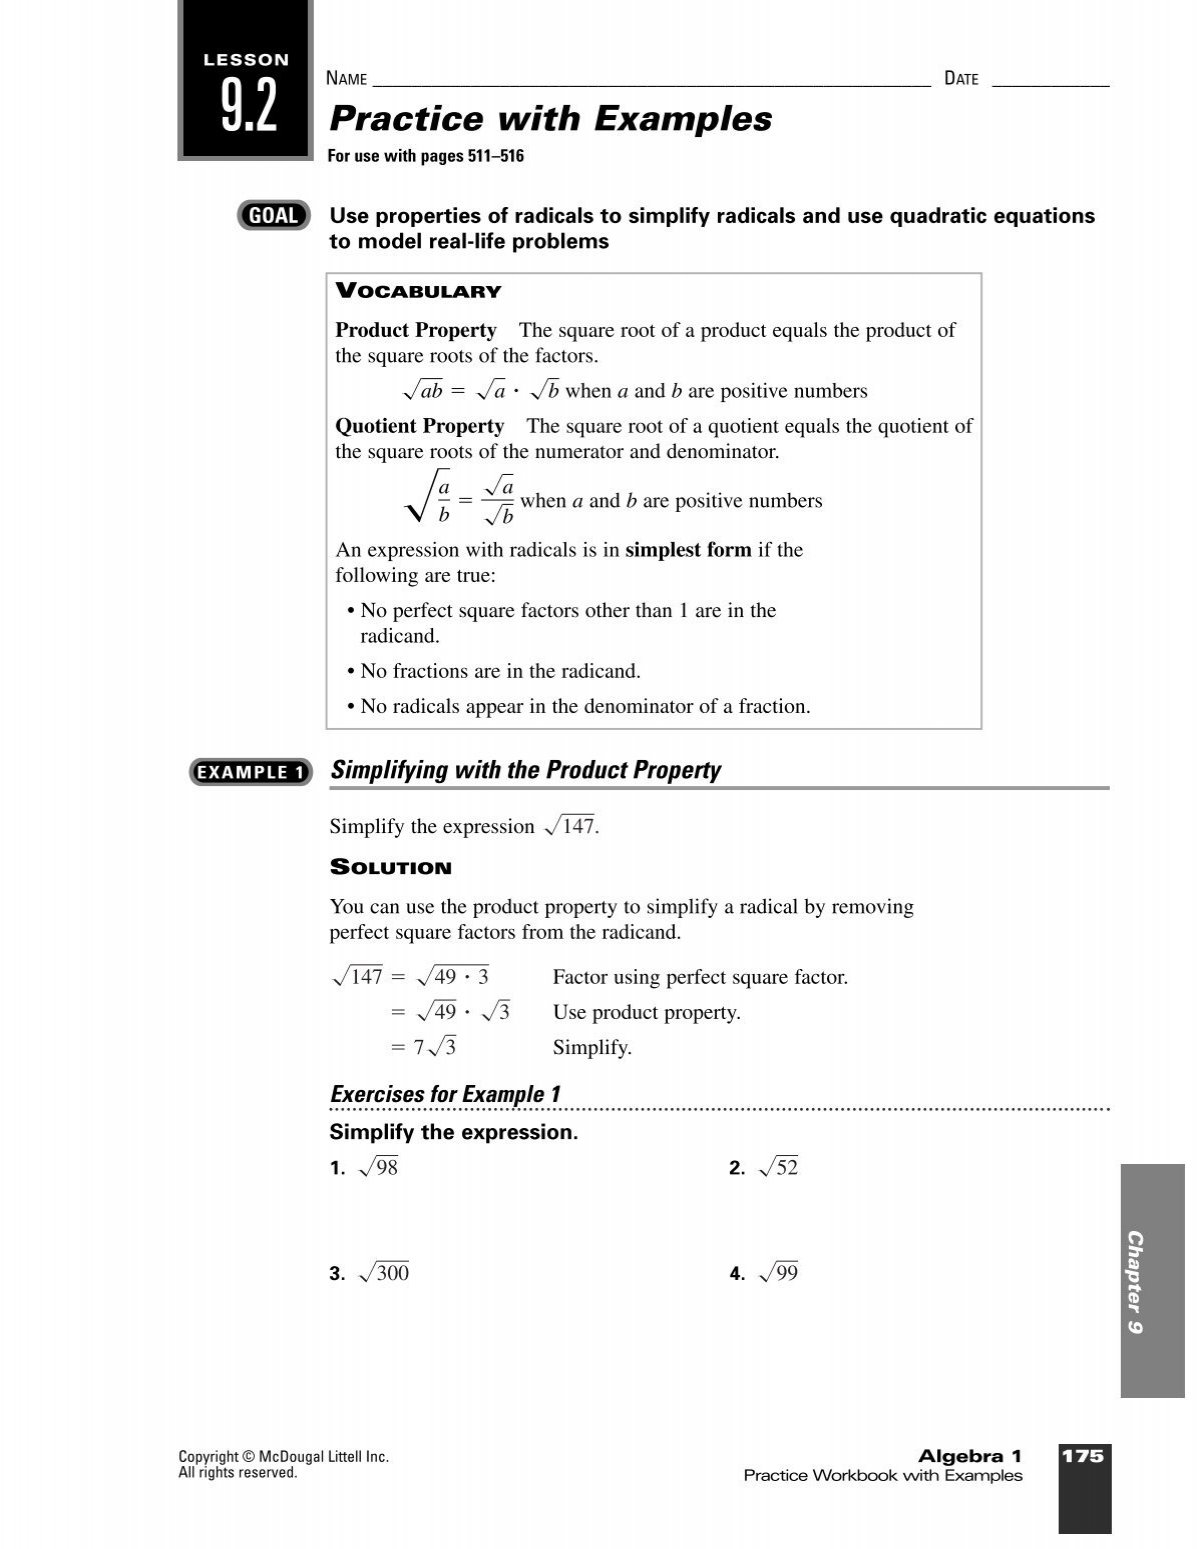 practice-worksheet-with-examples